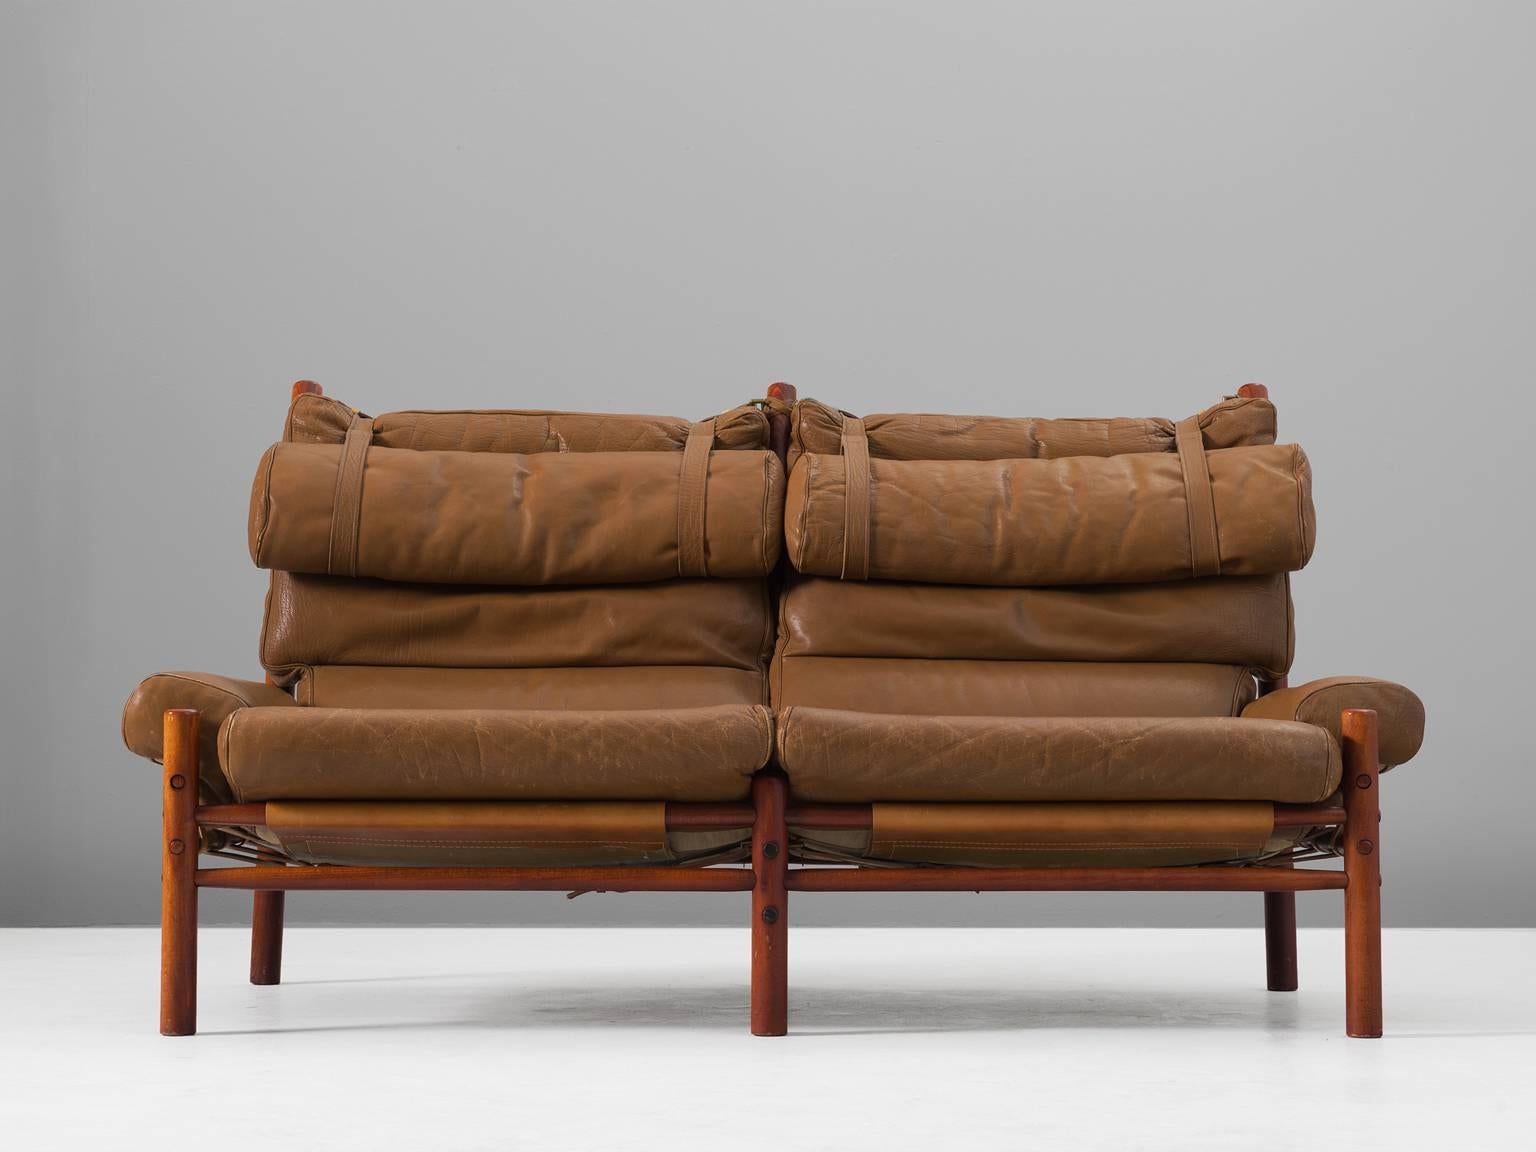 Sofa, leather with stained beech, 1965.

Inca sofa by Arne Norell. Really beautiful thick buffalo leather with some minor signs of wear. Overall, the settee has a beautiful patina on the leather. The frame is made from stained beech. Moreover, the